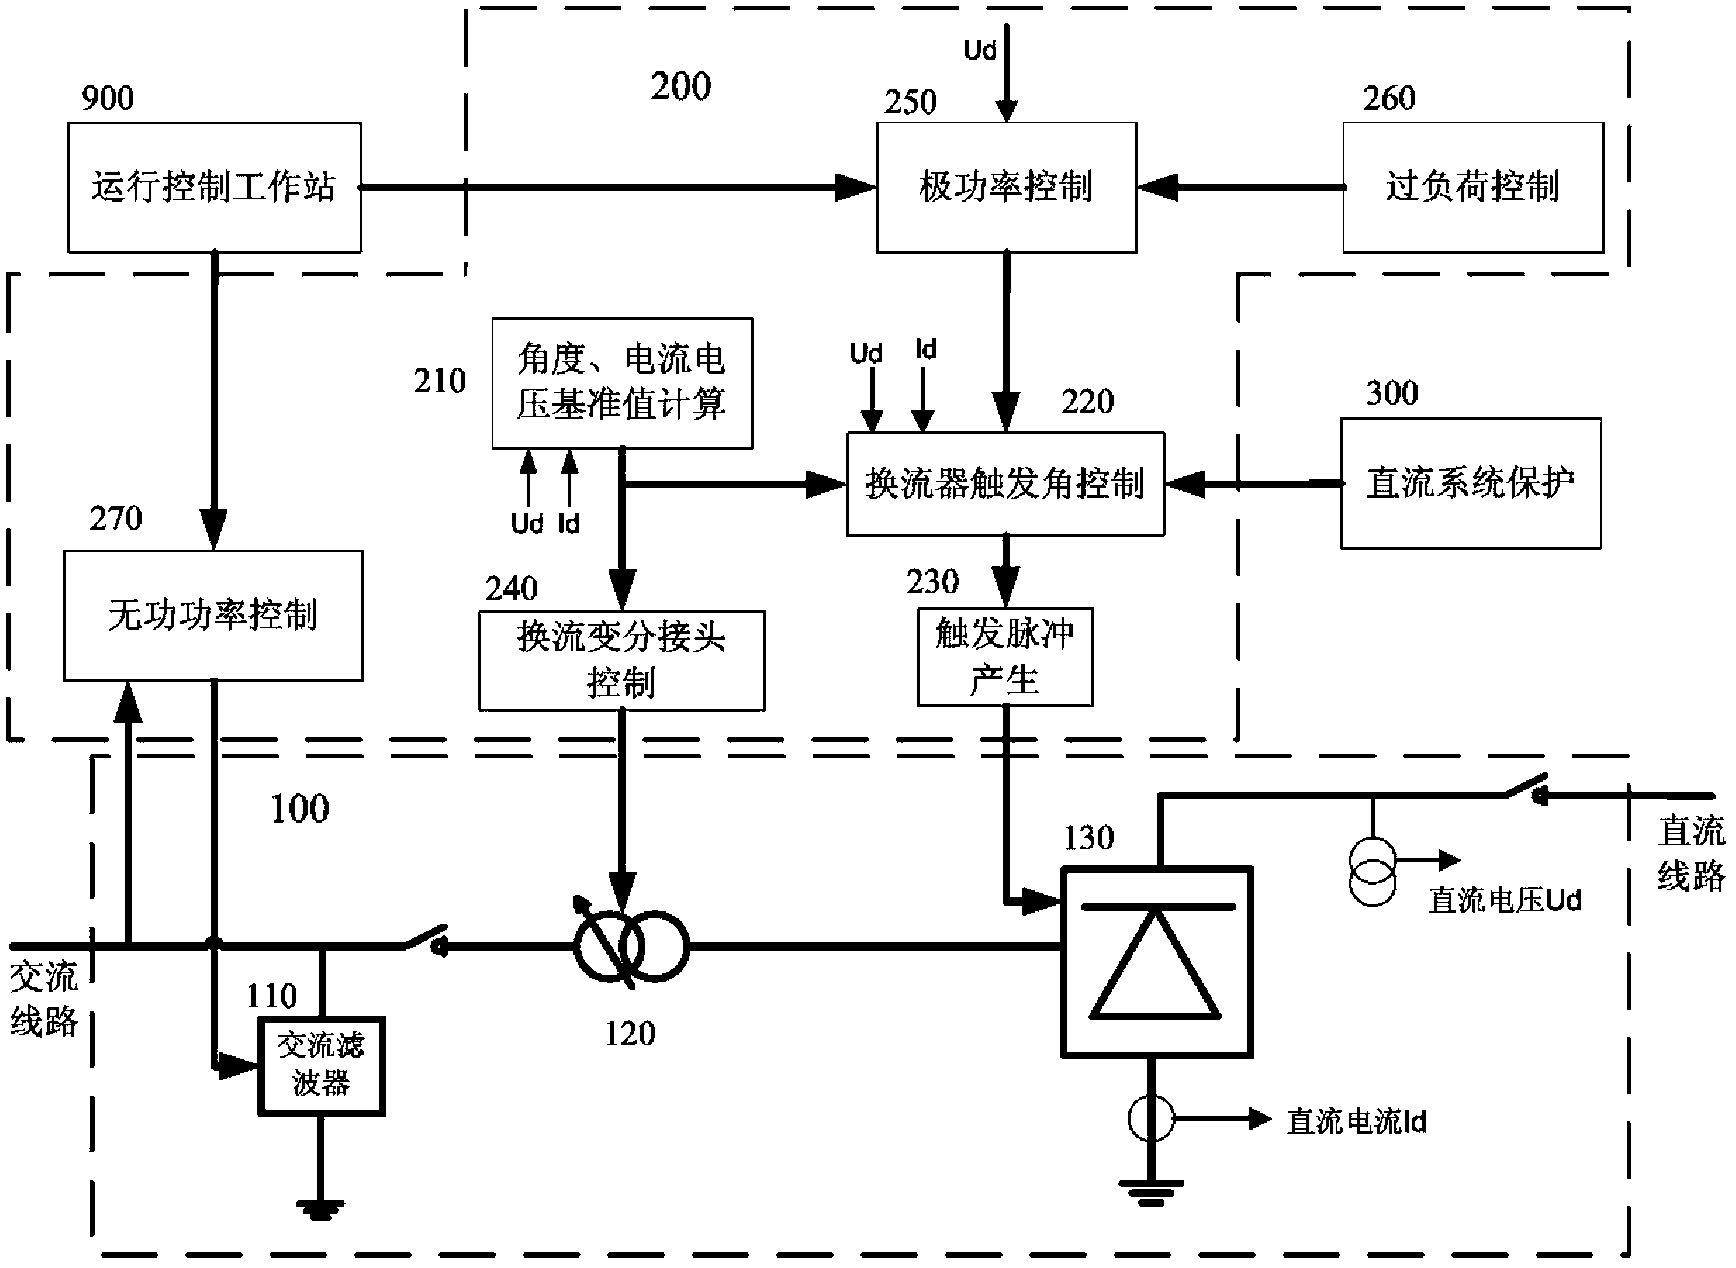 Tapping point rise-and-fall instruction simulation device